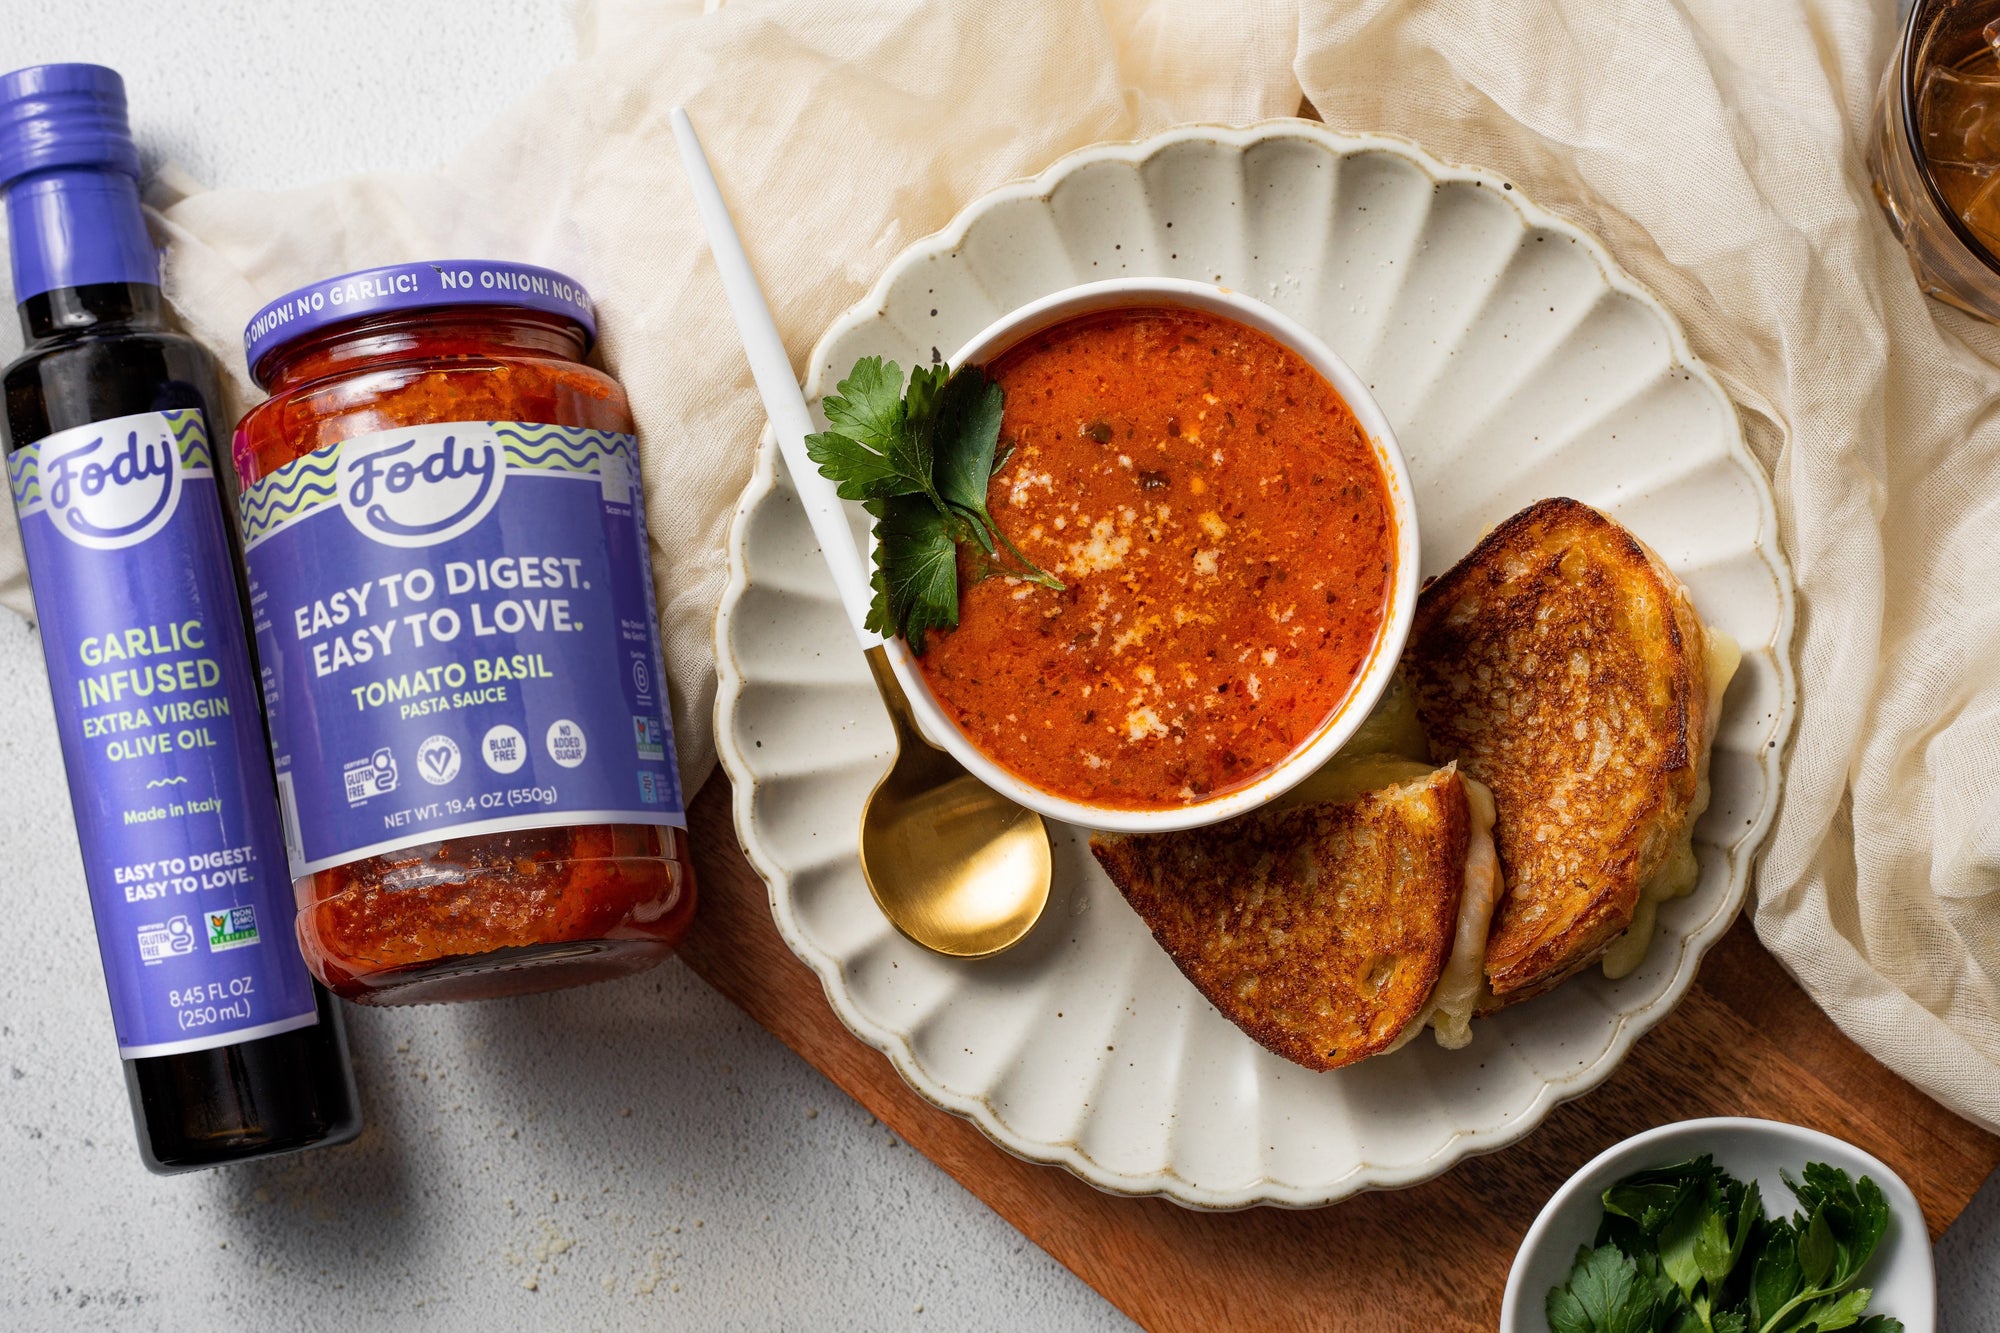 A bowl of Fody's easy tomato soup on a plate with scalloped edges, beside a garlicky grilled cheese